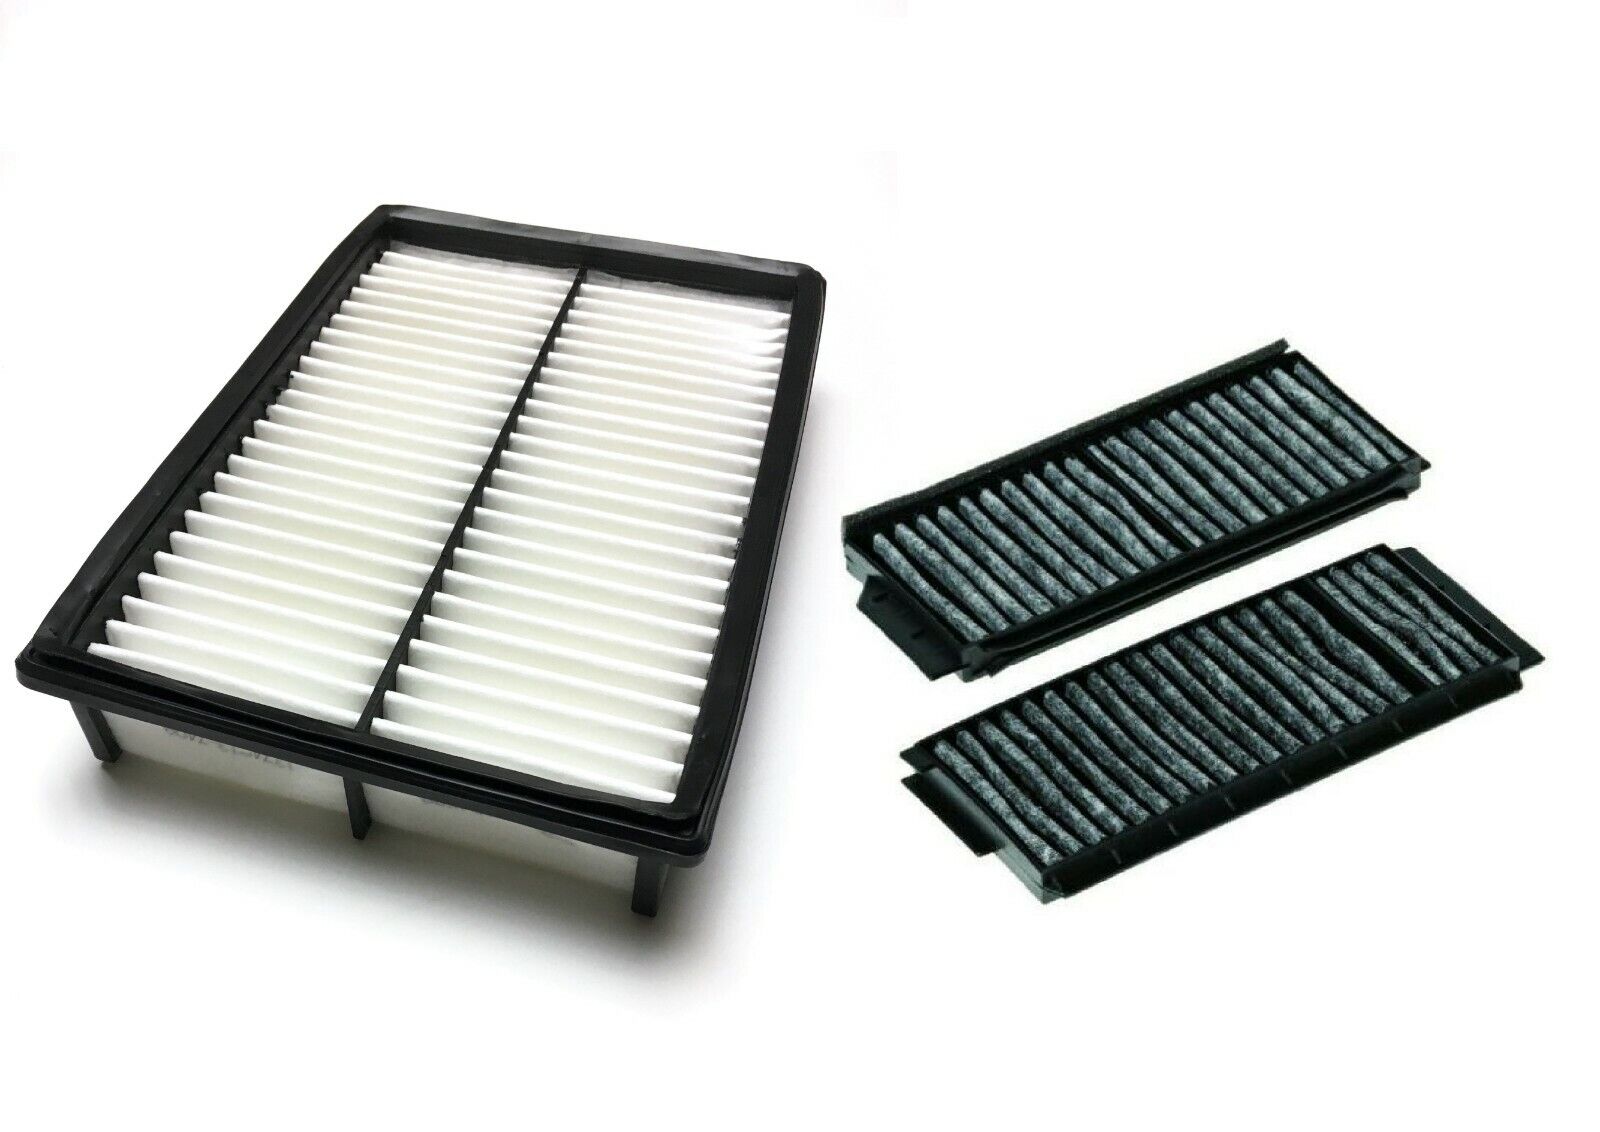 AIR FILTER & CHARCOAL CABIN FILTER COMBO SET FOR 2004-2009 MAZDA3 & ALL MAZDA5